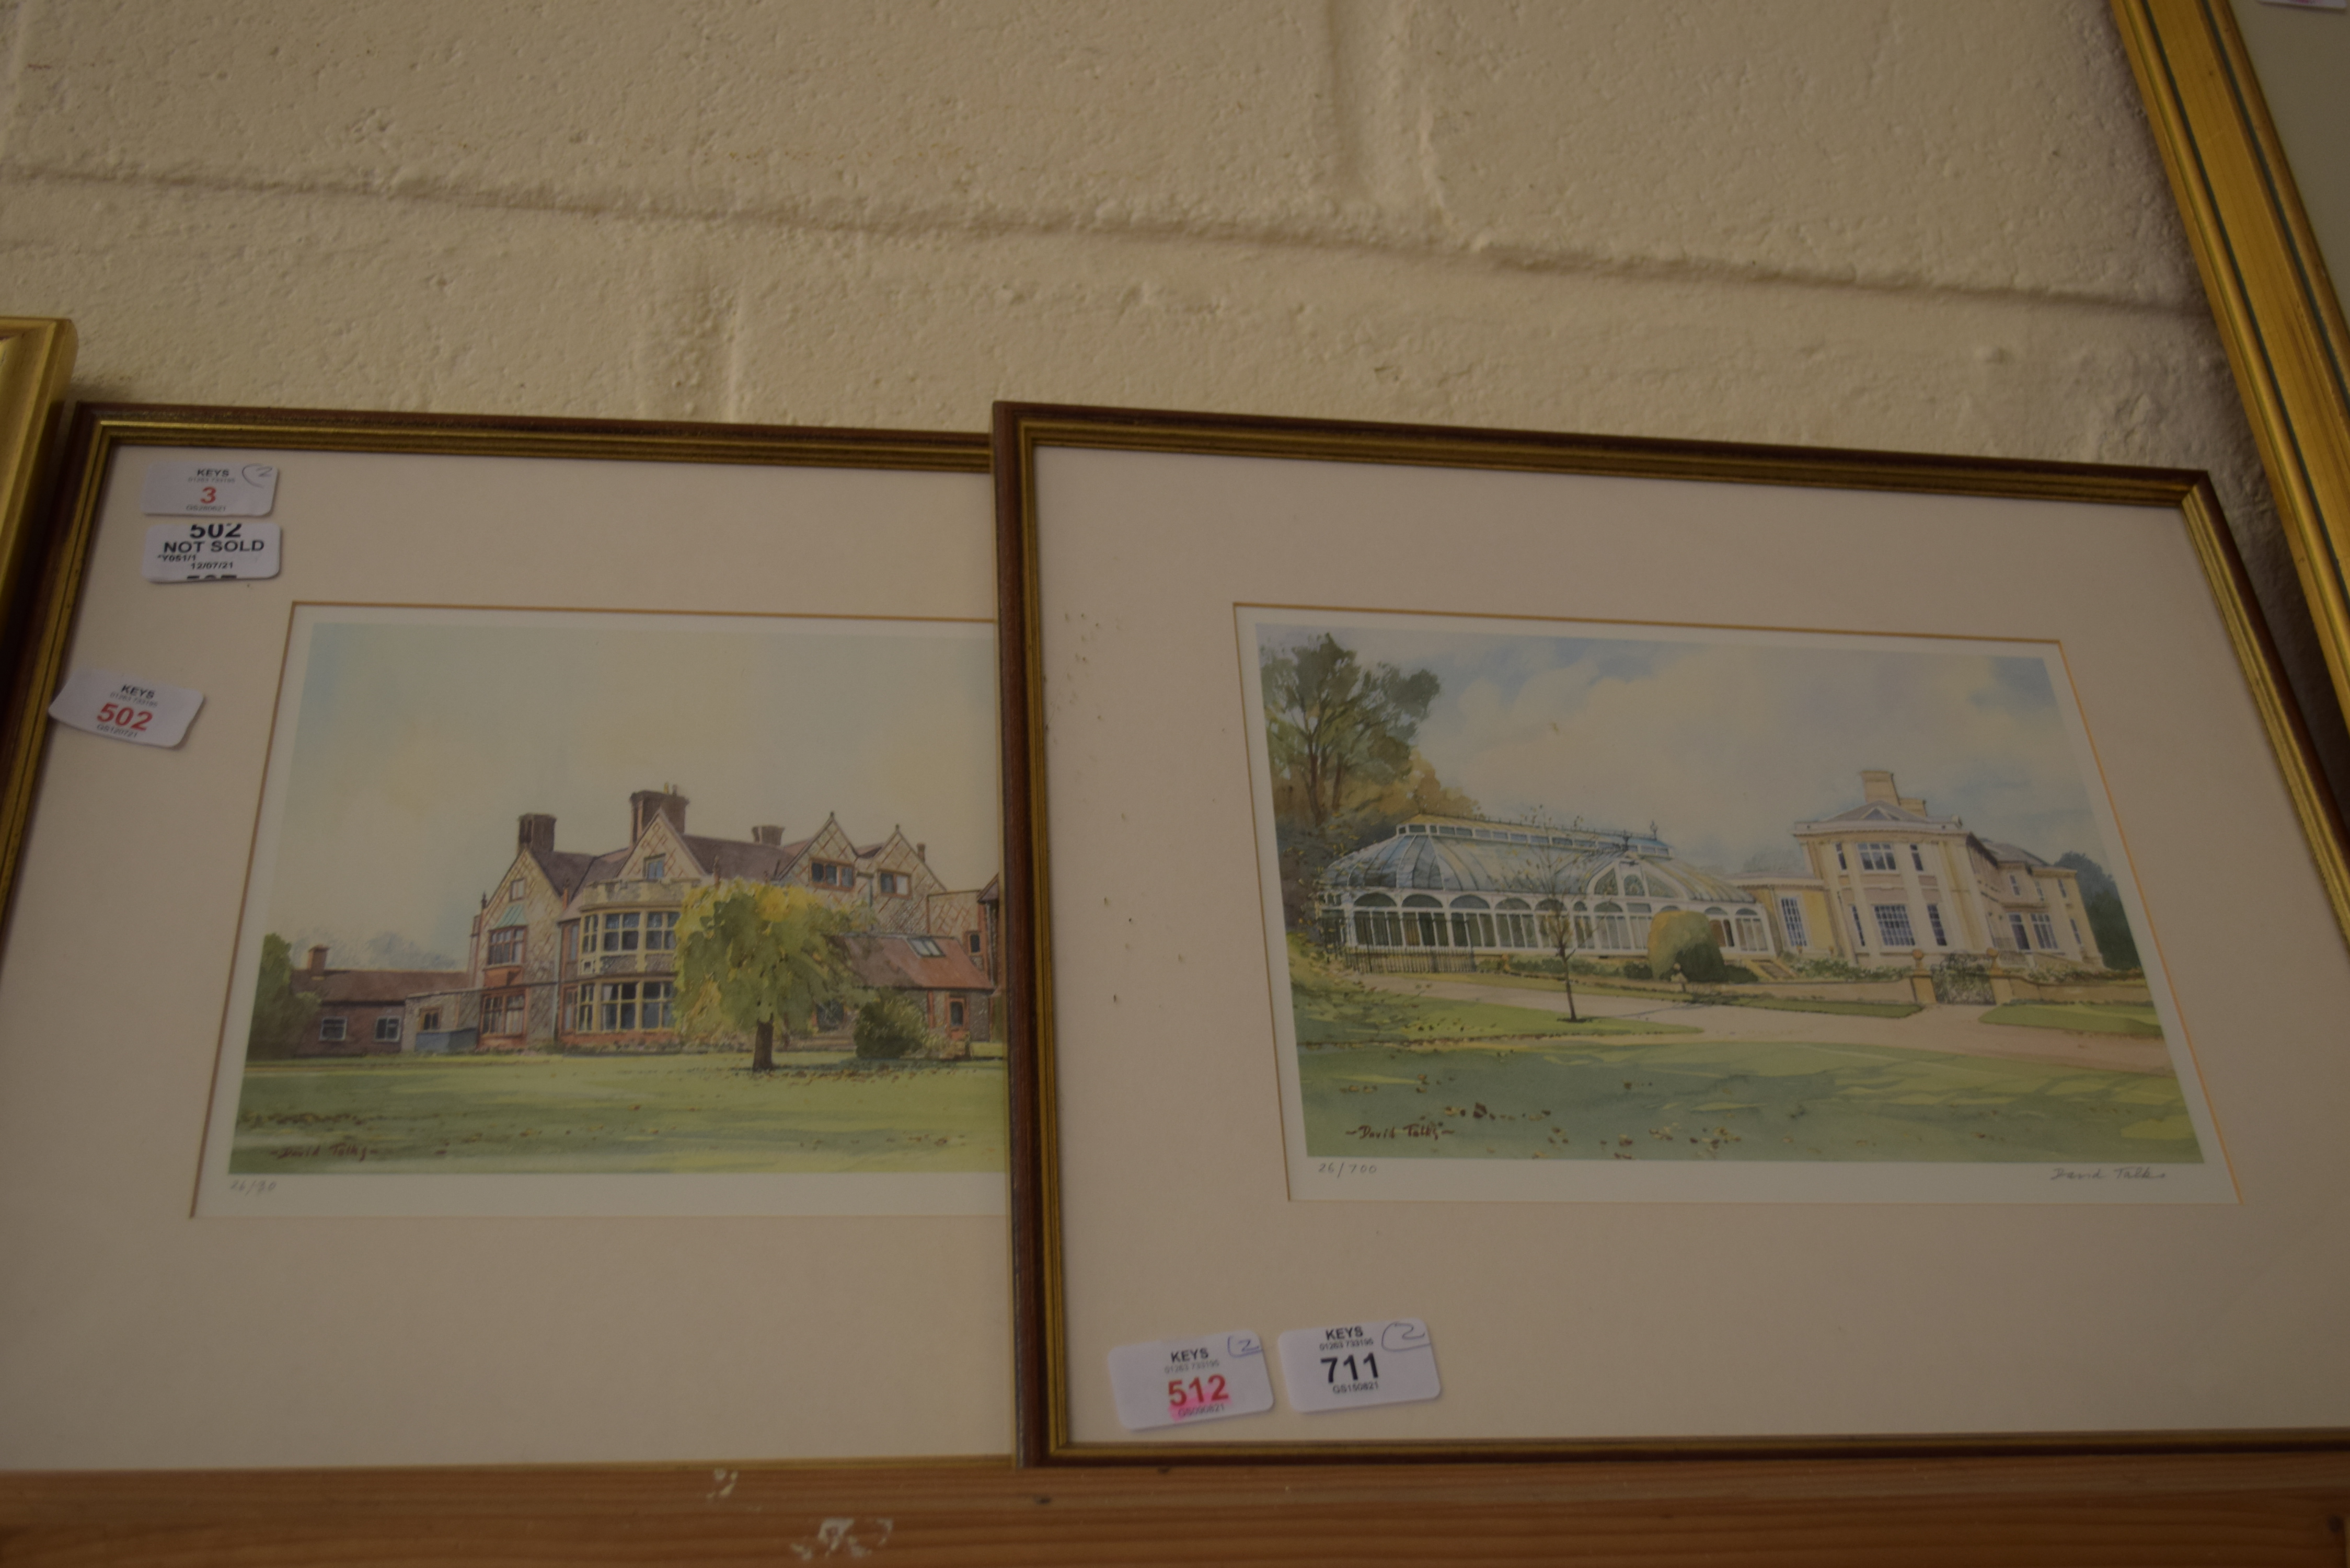 TWO PRINTS AFTER DAVID TALKS, BOTH OF COUNTRY HOUSES, FRAMED AND GLAZED